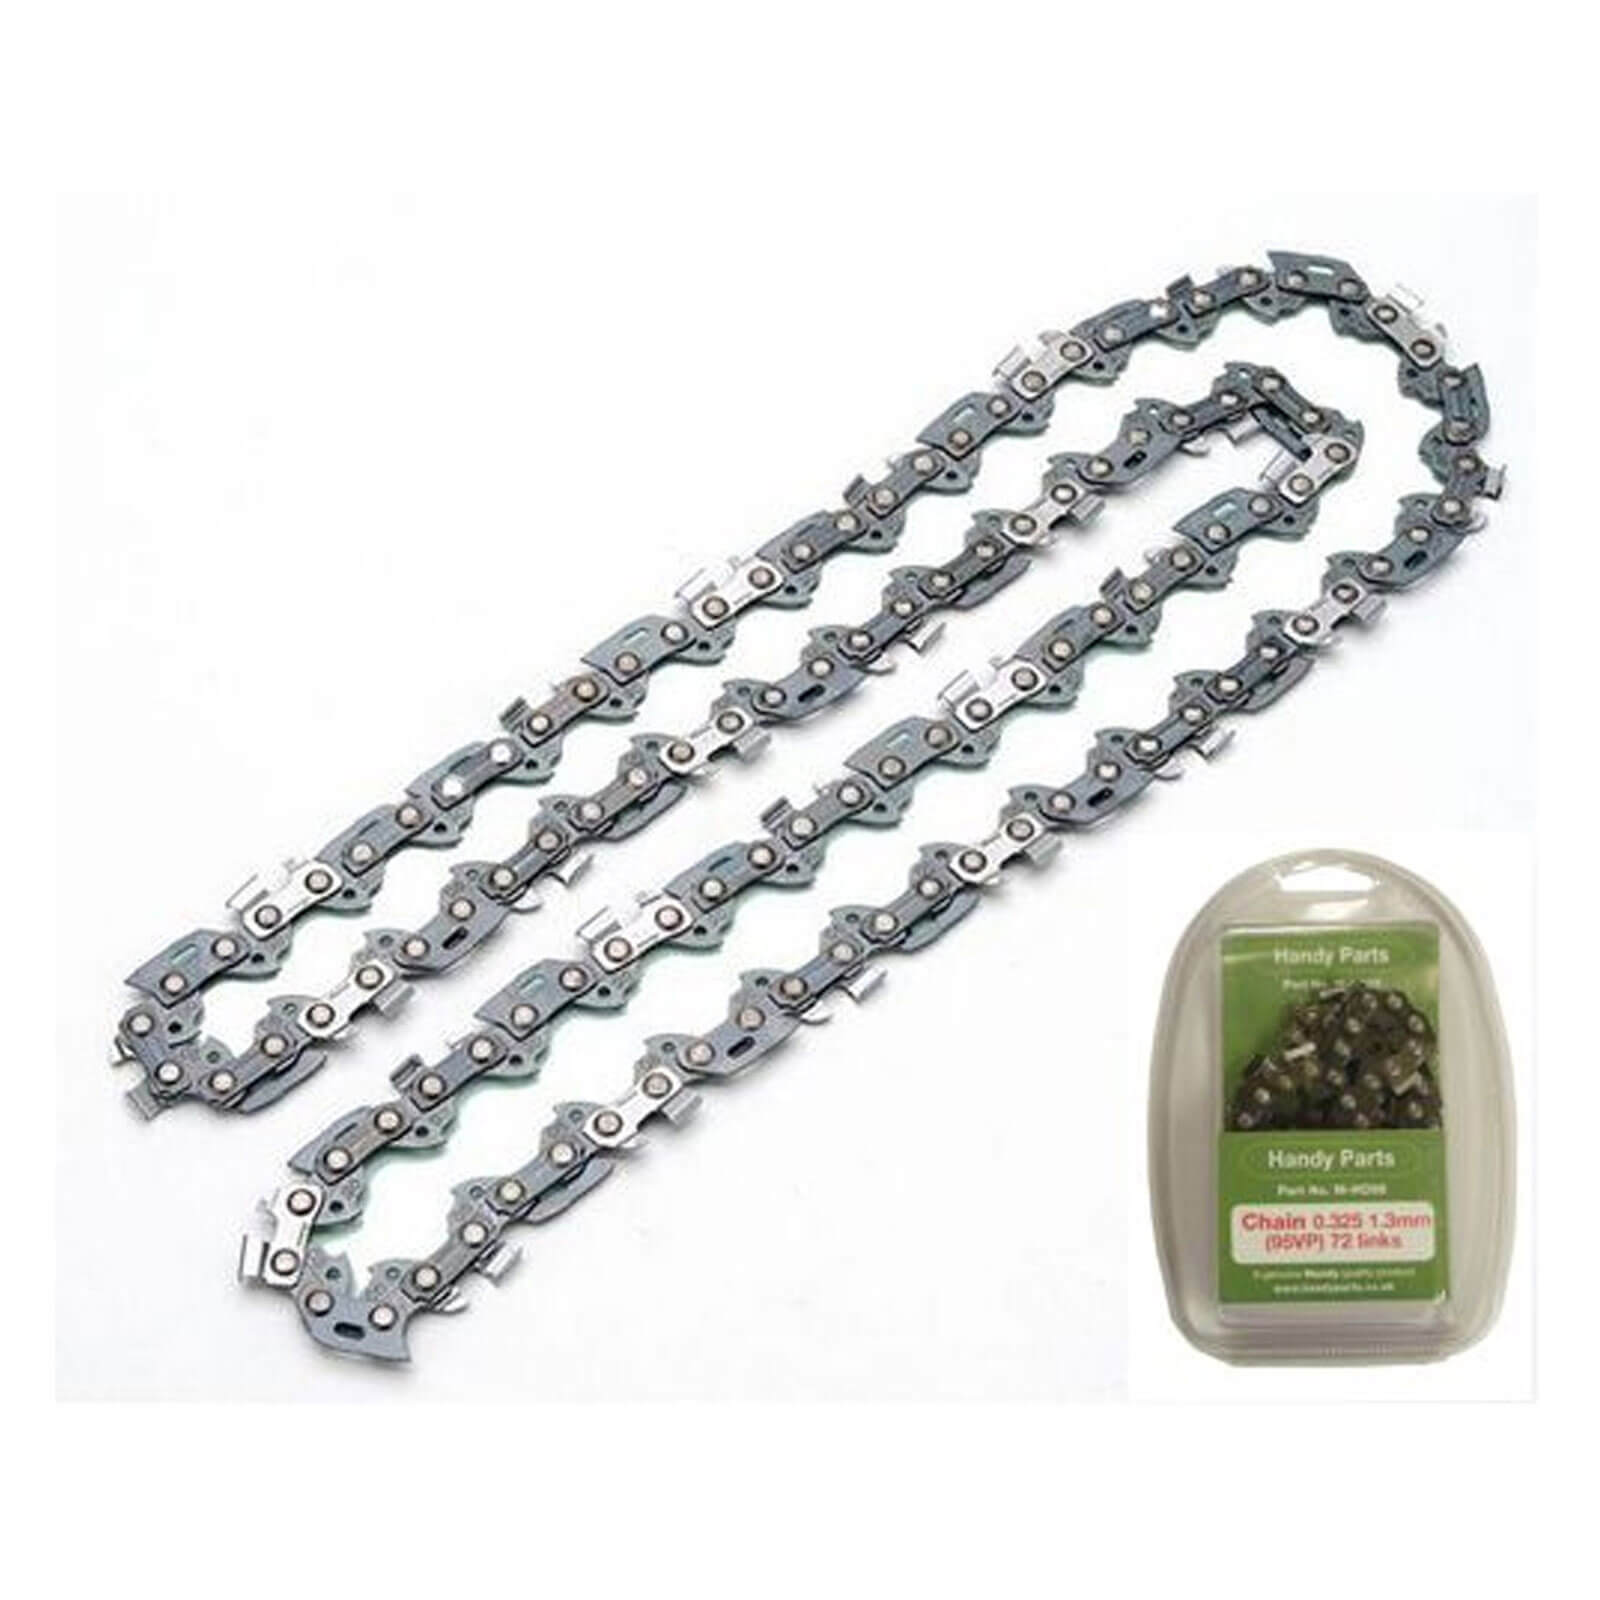 Image of Handy Chainsaw Chain Oregon 90S Equivalent 3/8" 1.1mm 45